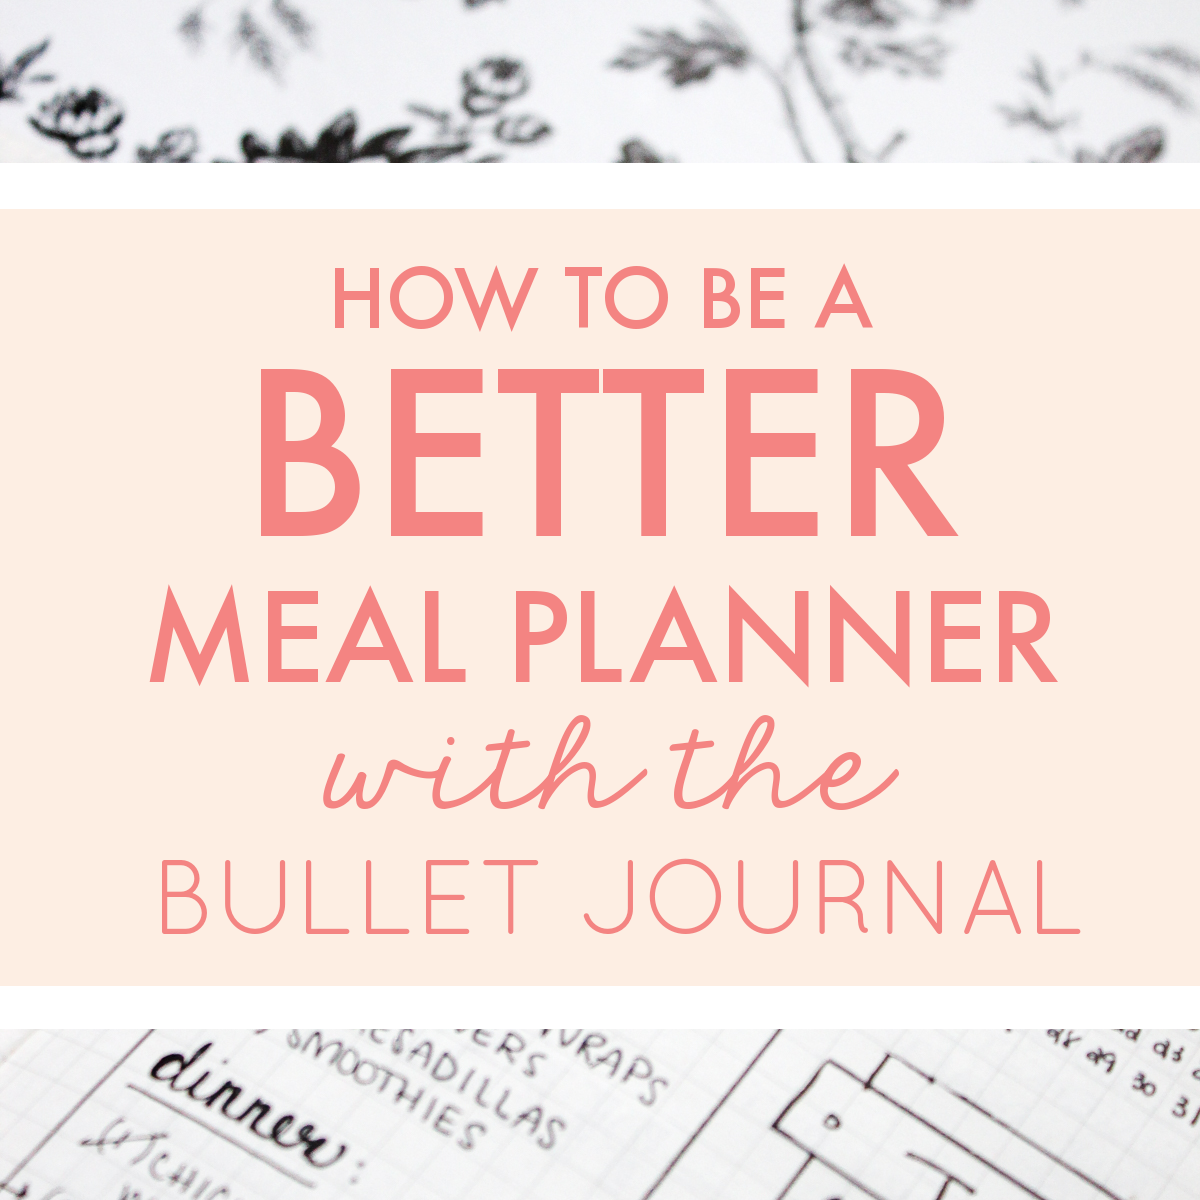 How to Be a Better Meal Planner with the Bullet Journal